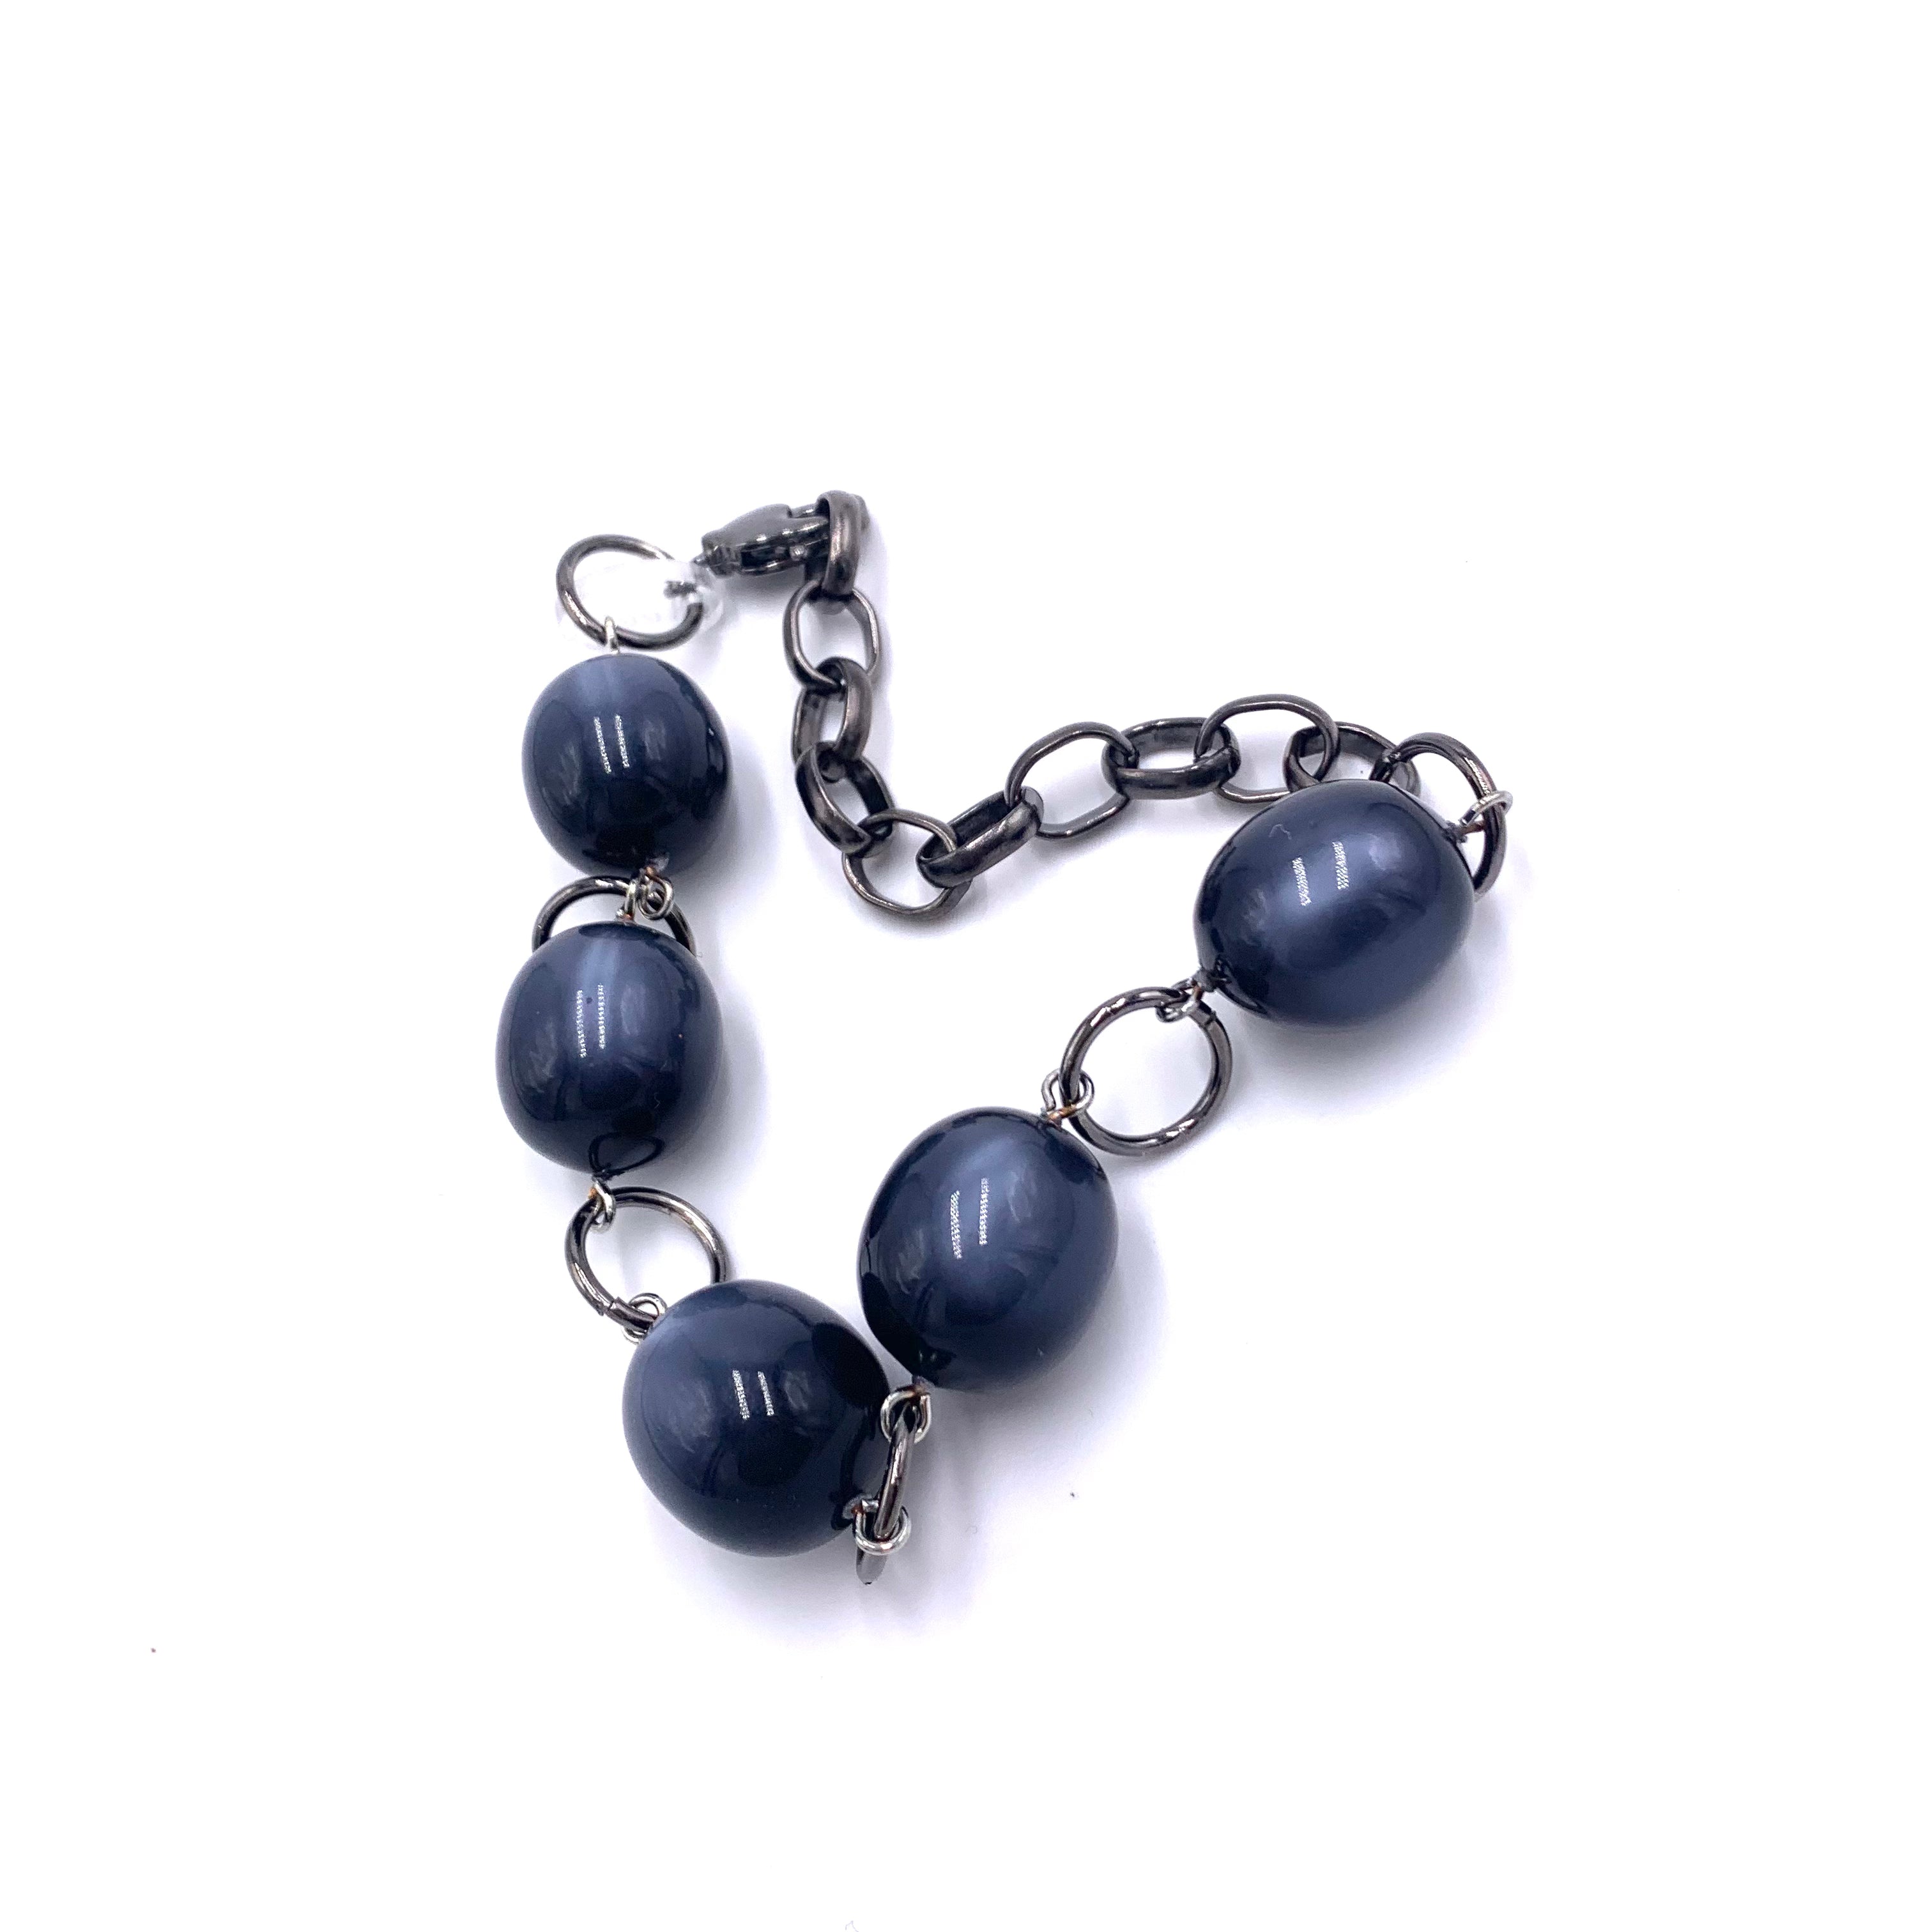 Charcoal Oval Moonglow Stations Bracelet